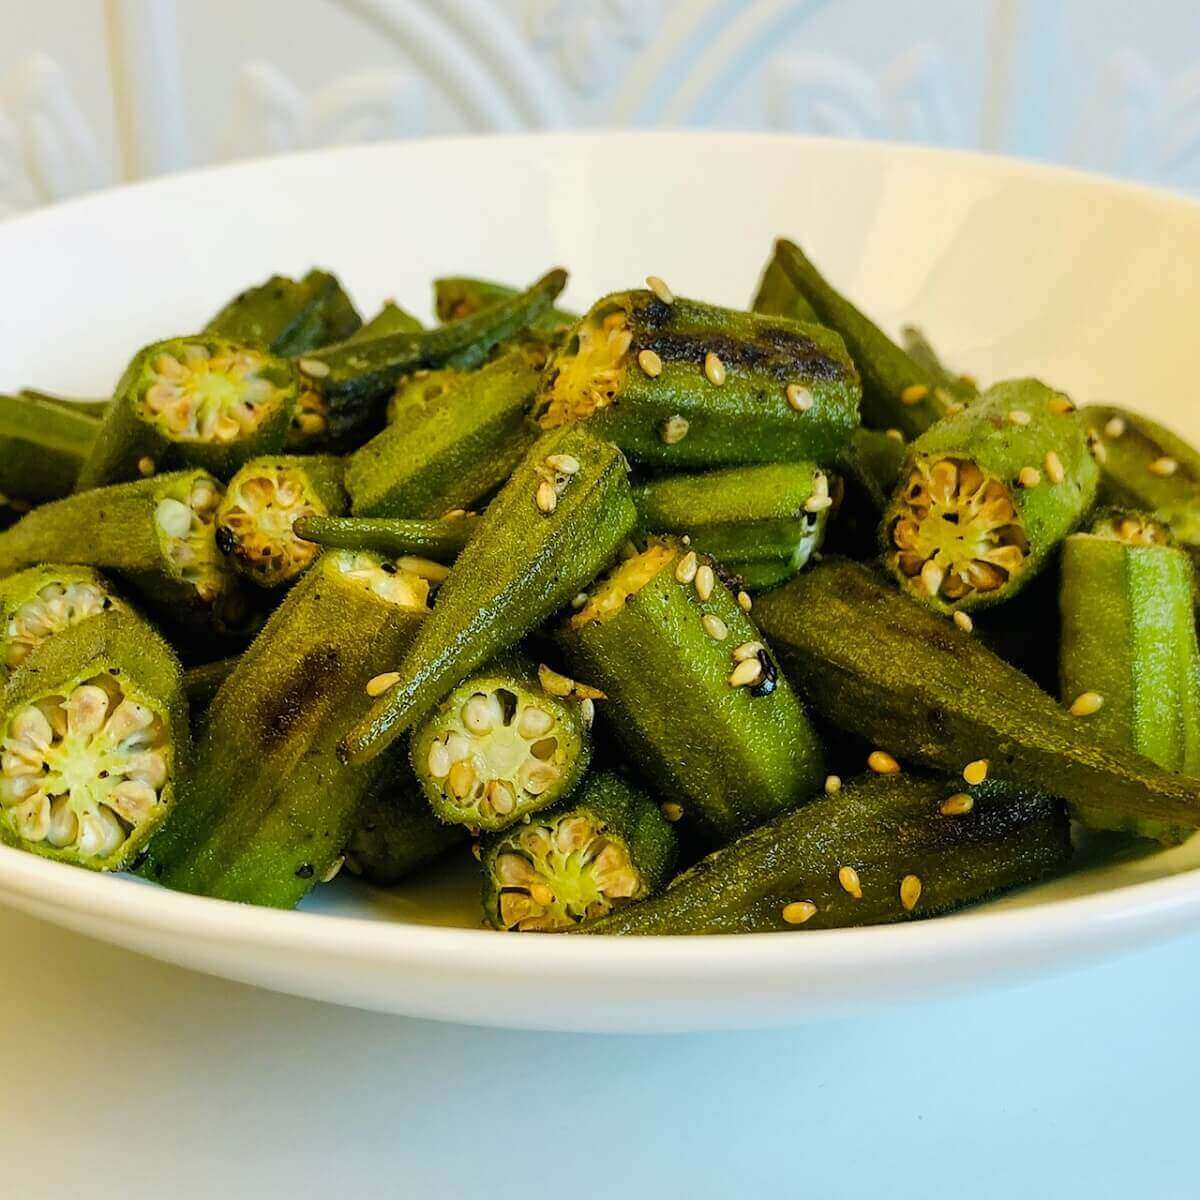 Oven baked okra piled in a bowl.